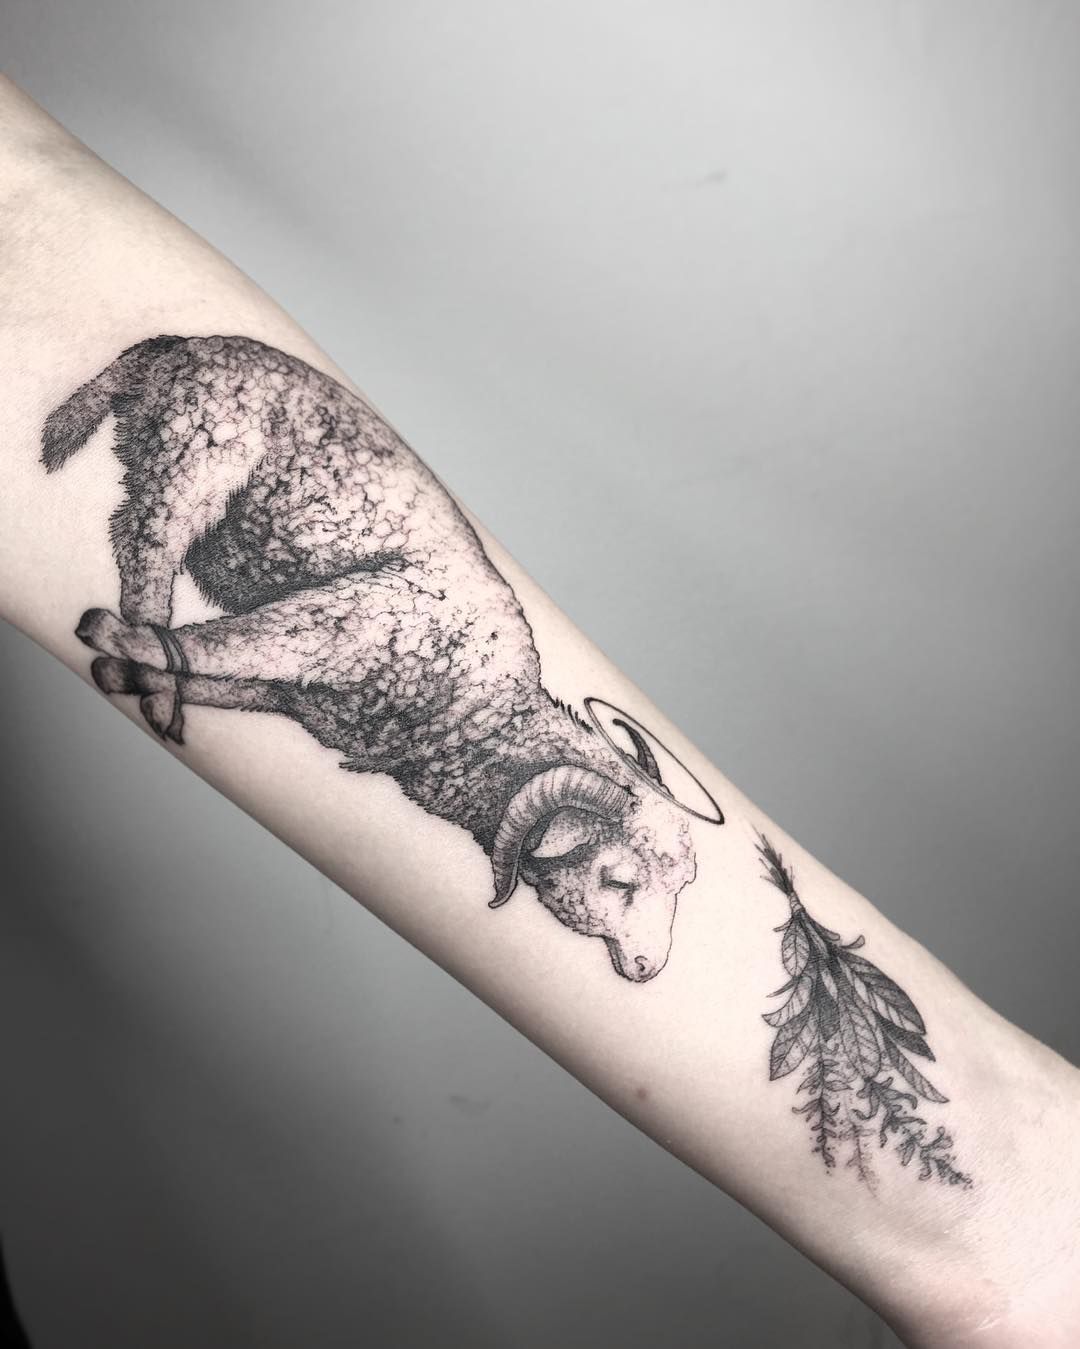 What Does A Lamb Tattoo Mean? Exploring Tattoo Meanings and Their Cultural Significance